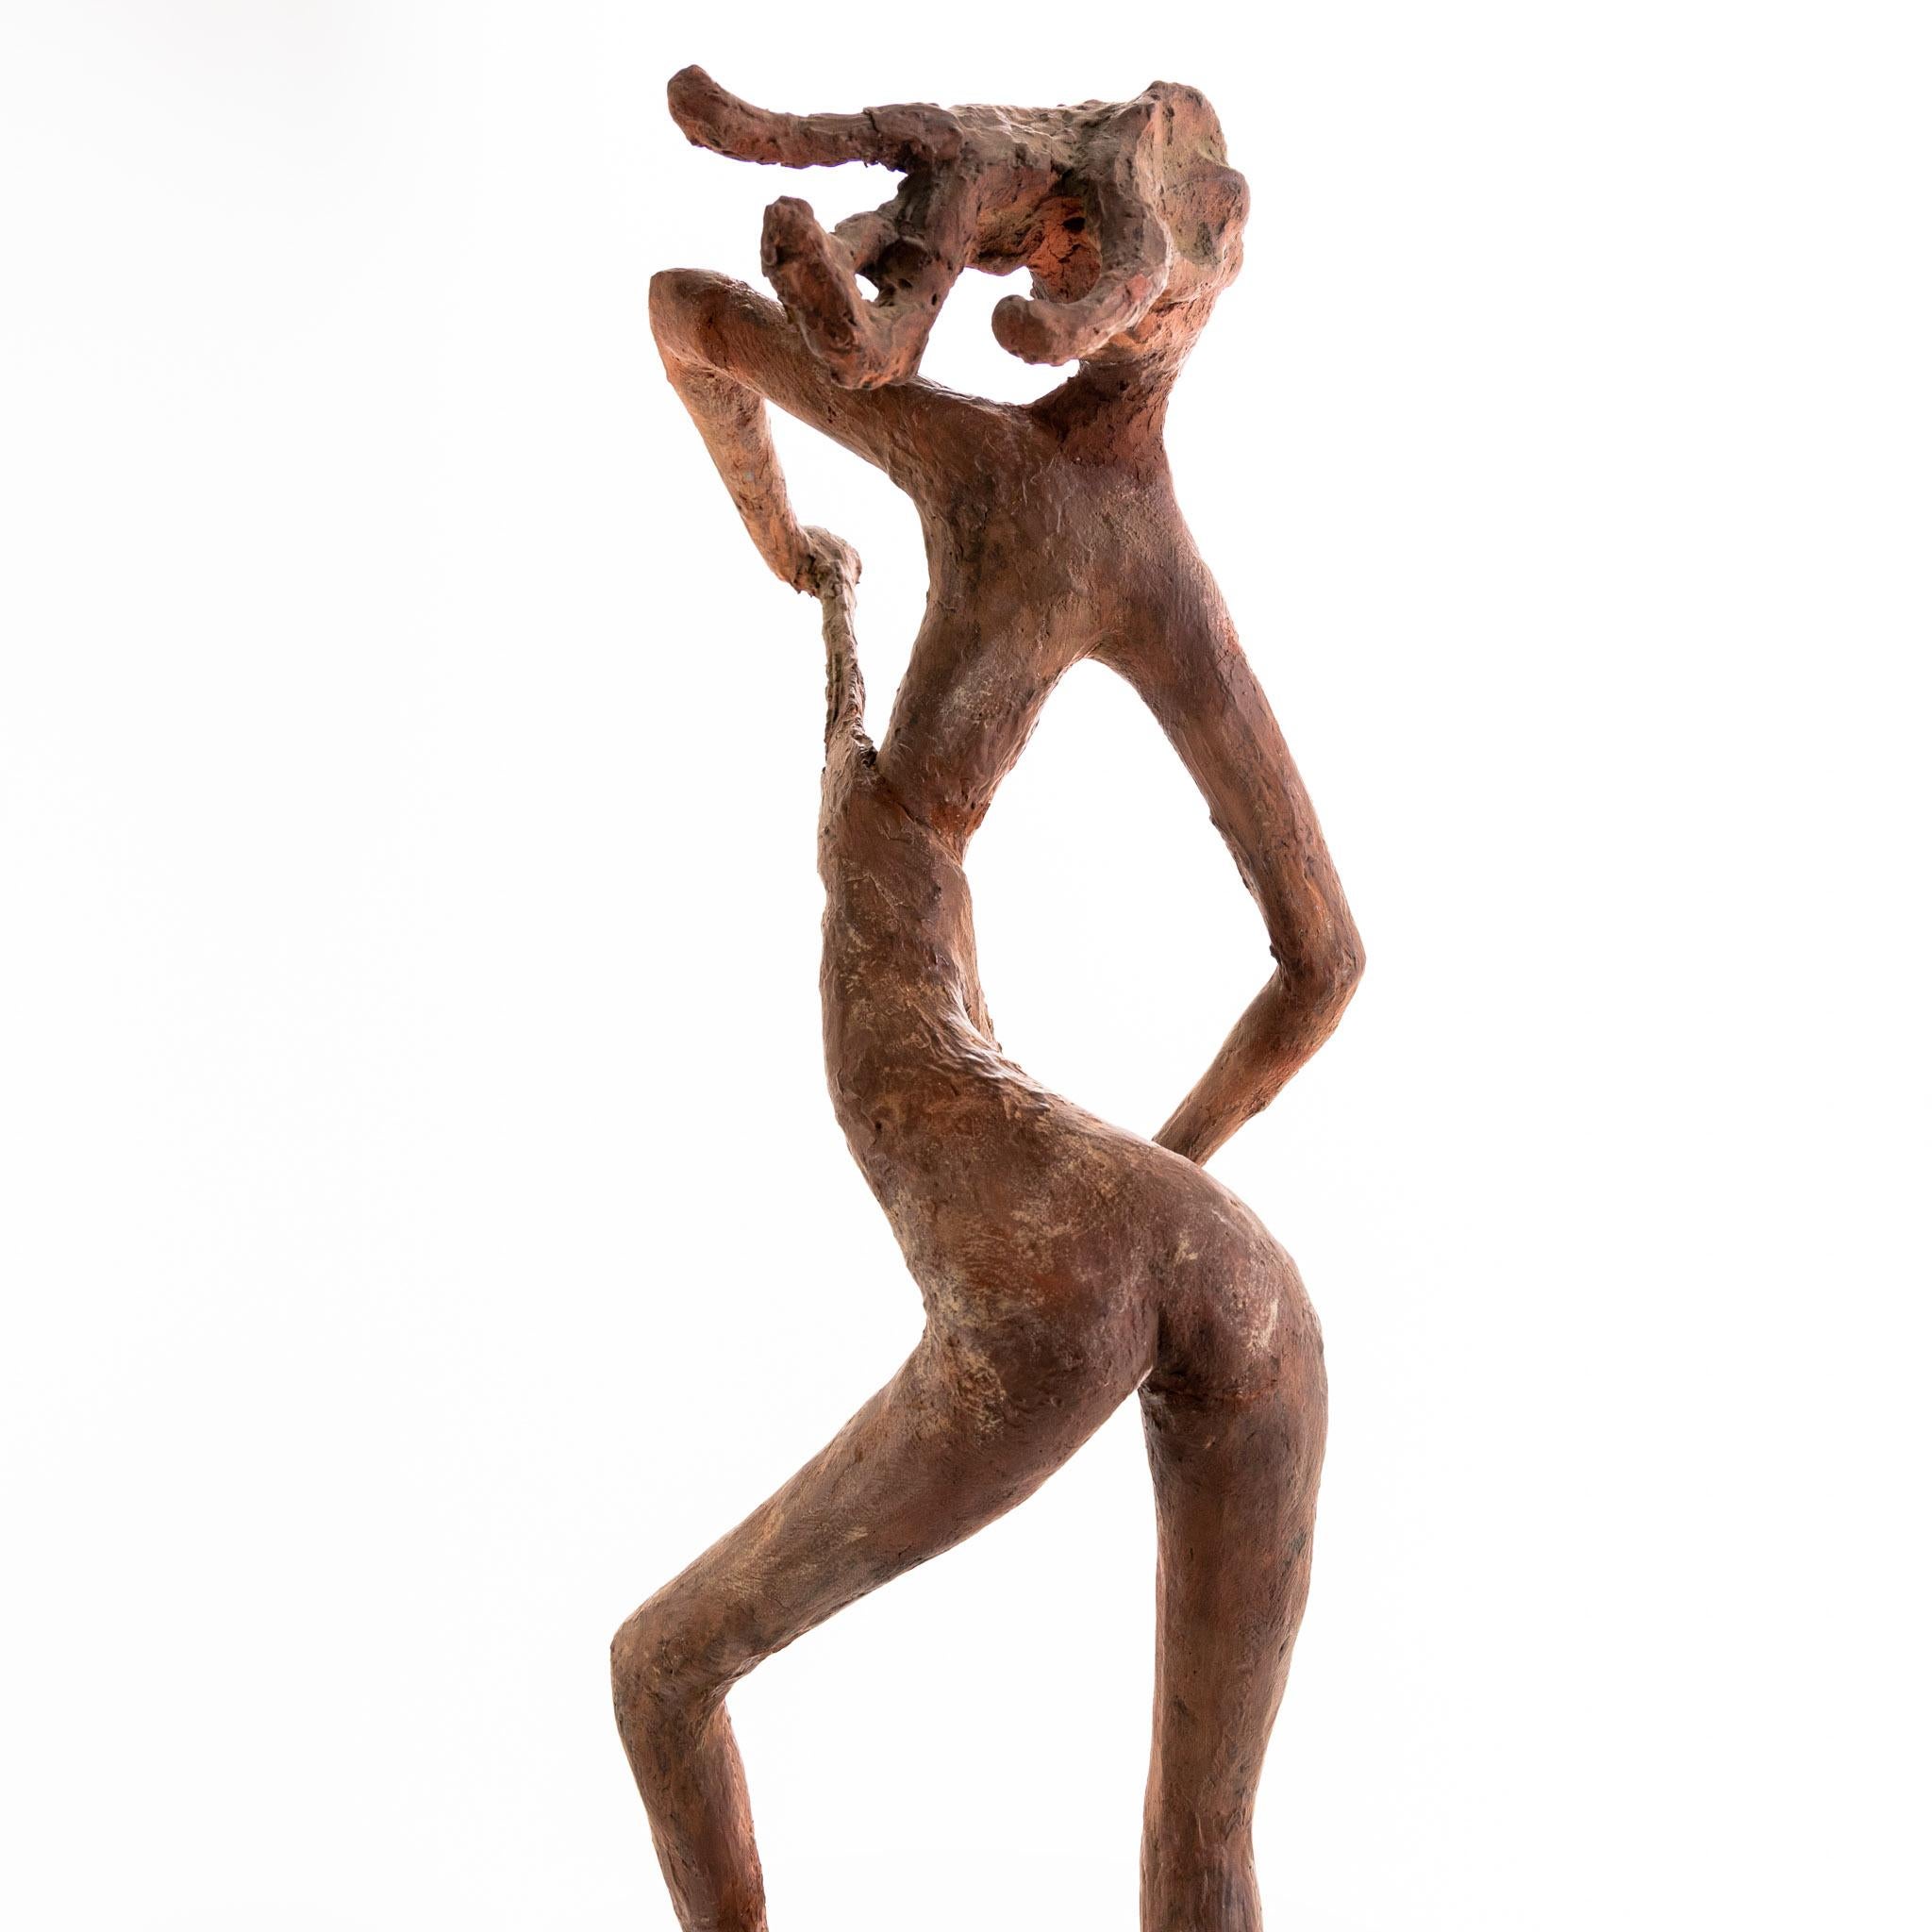 Terracotta bozzetto, dancing woman nude - Brown Nude Sculpture by Unknown